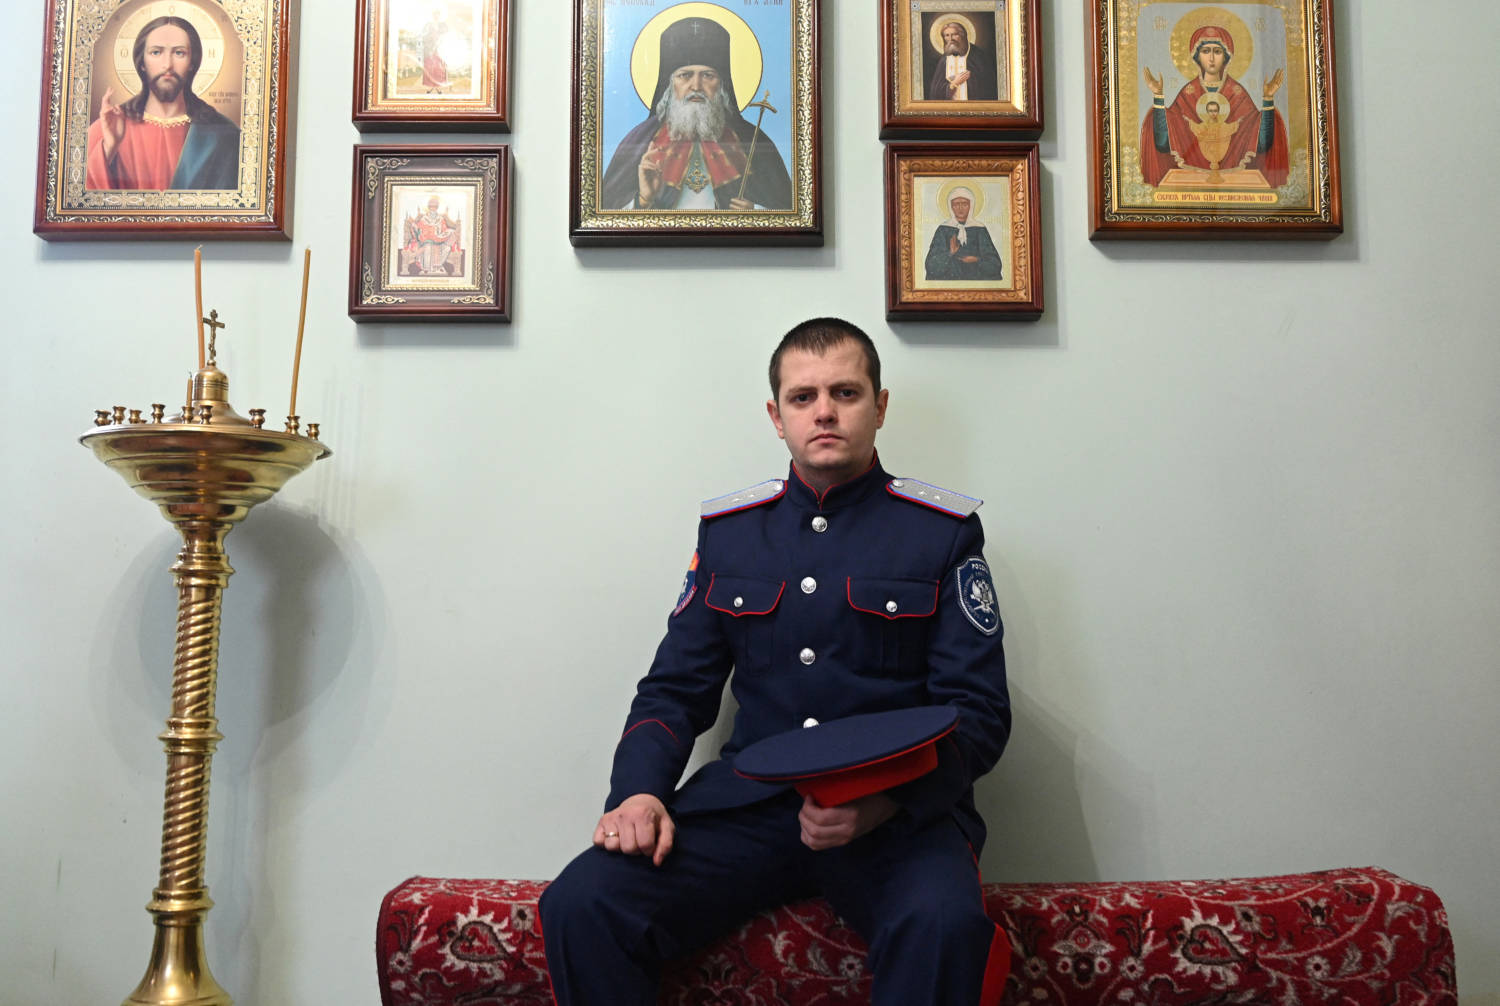 Artyom Kolenov, Cossack And Agronomist, Poses For A Picture In Krasnyi Kolos